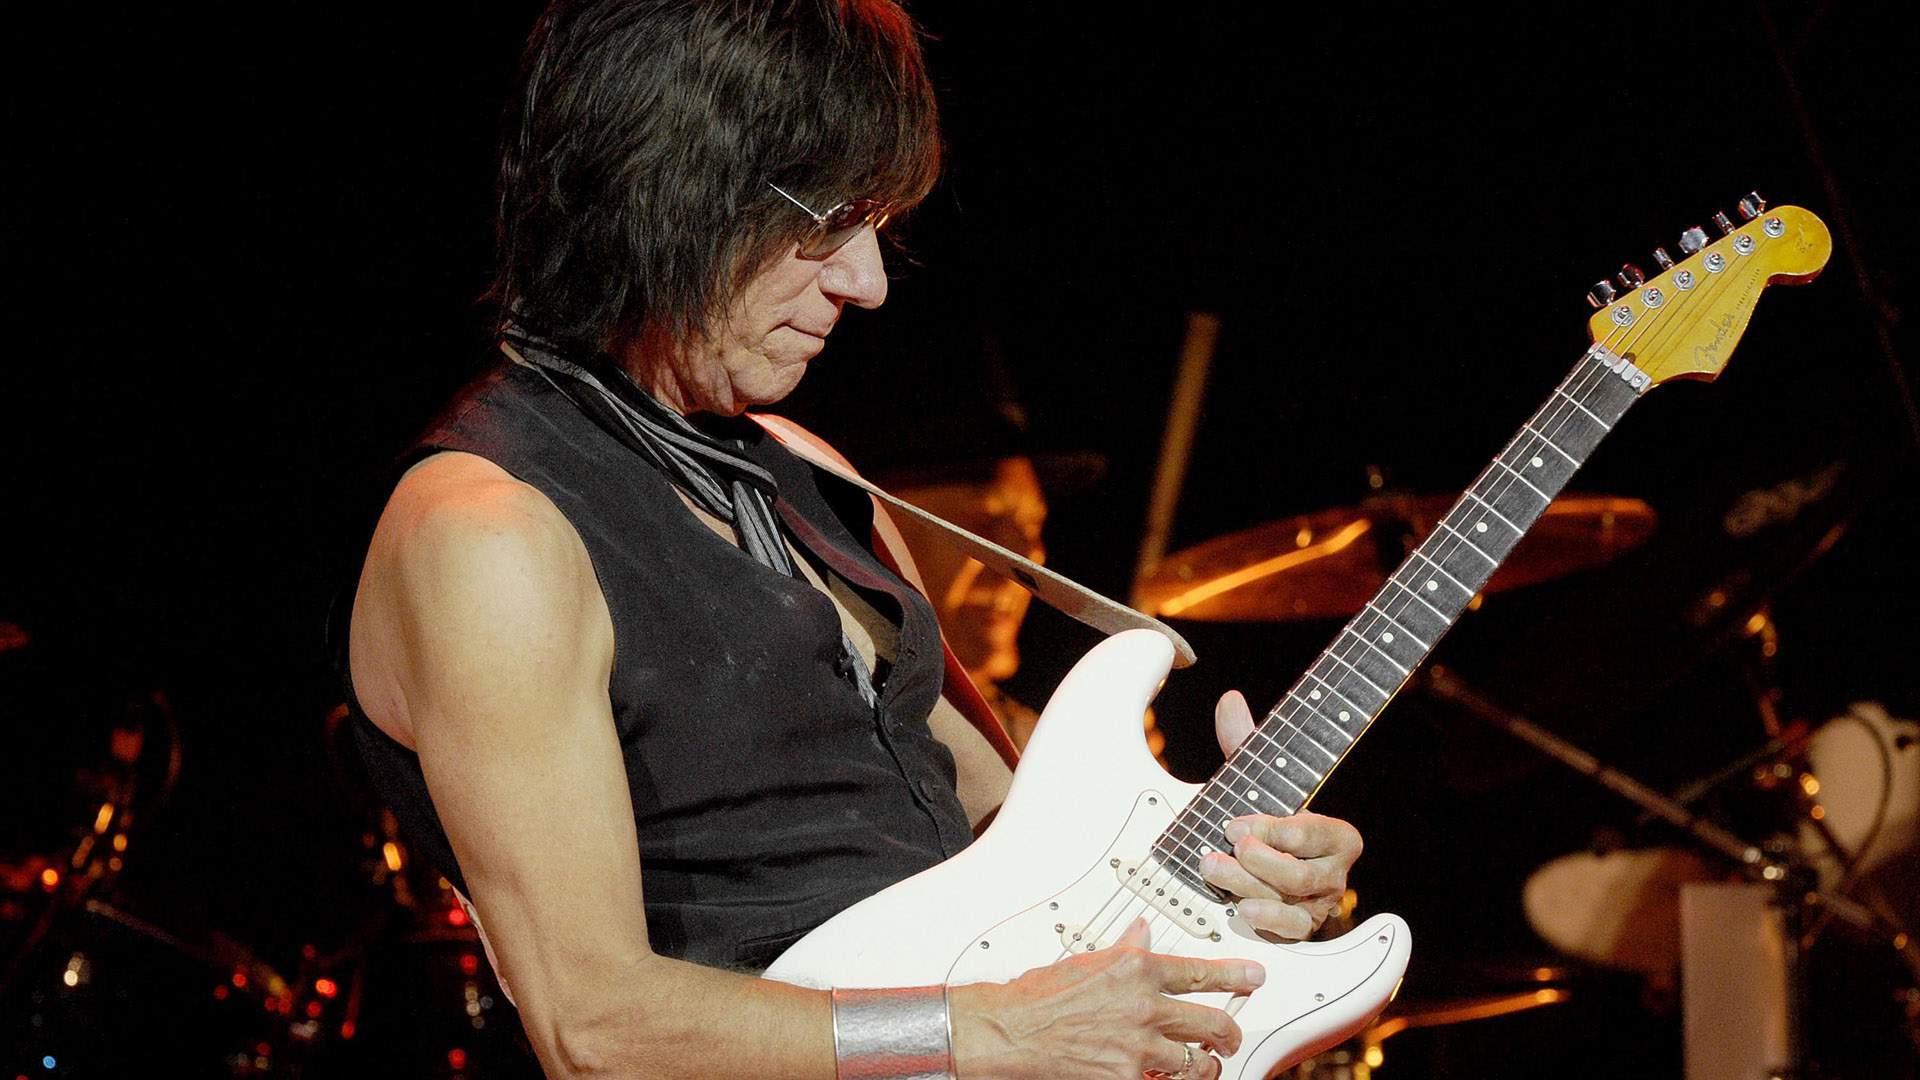 Jeff Beck Tour Dates 2016 2017. Concerts, Tickets, Music